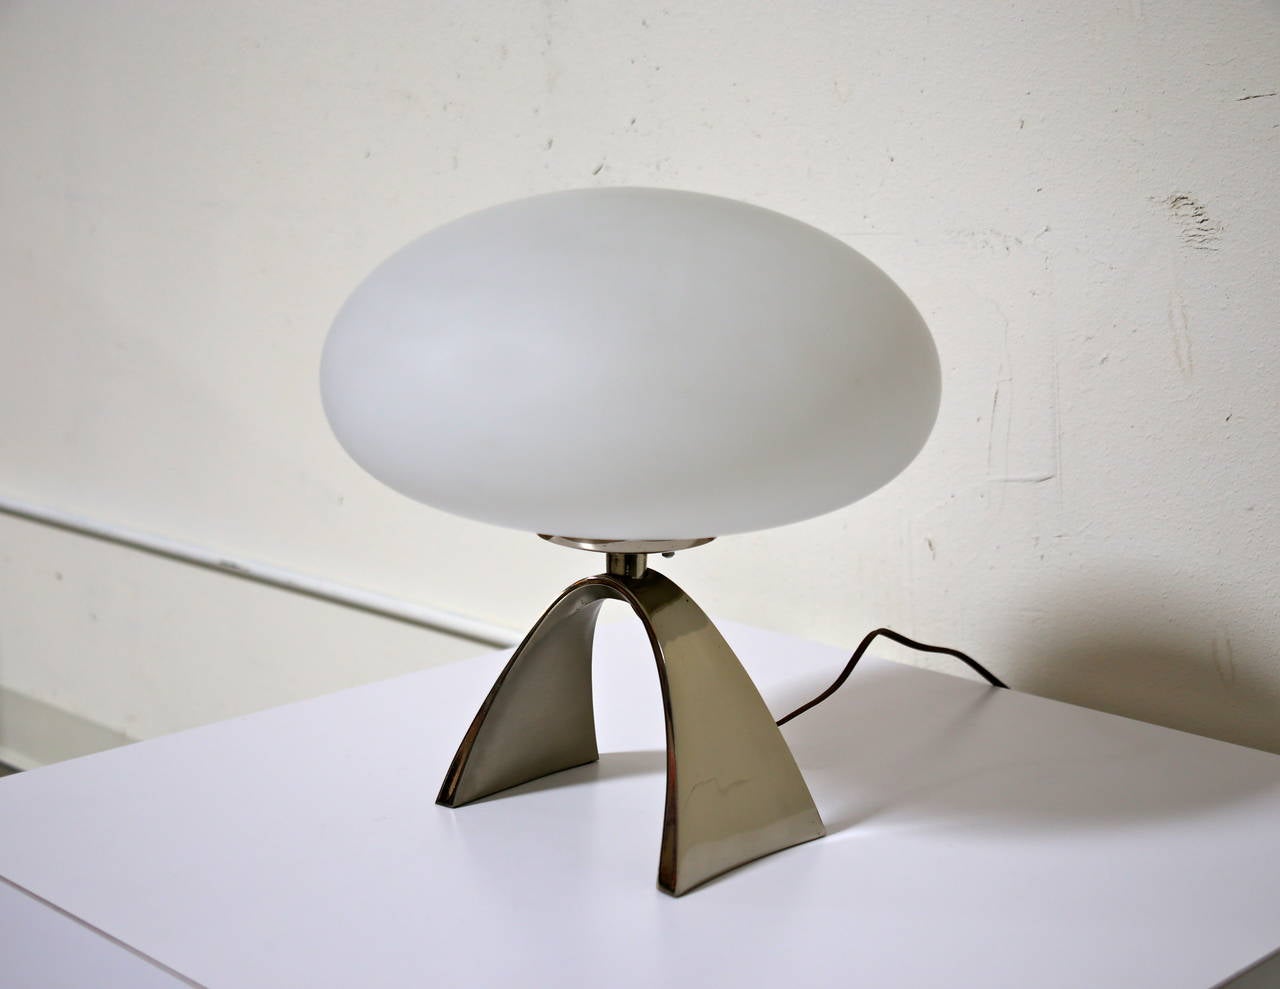 Frosted glass mushroom lamp by Laurel with arched polished nickel base.